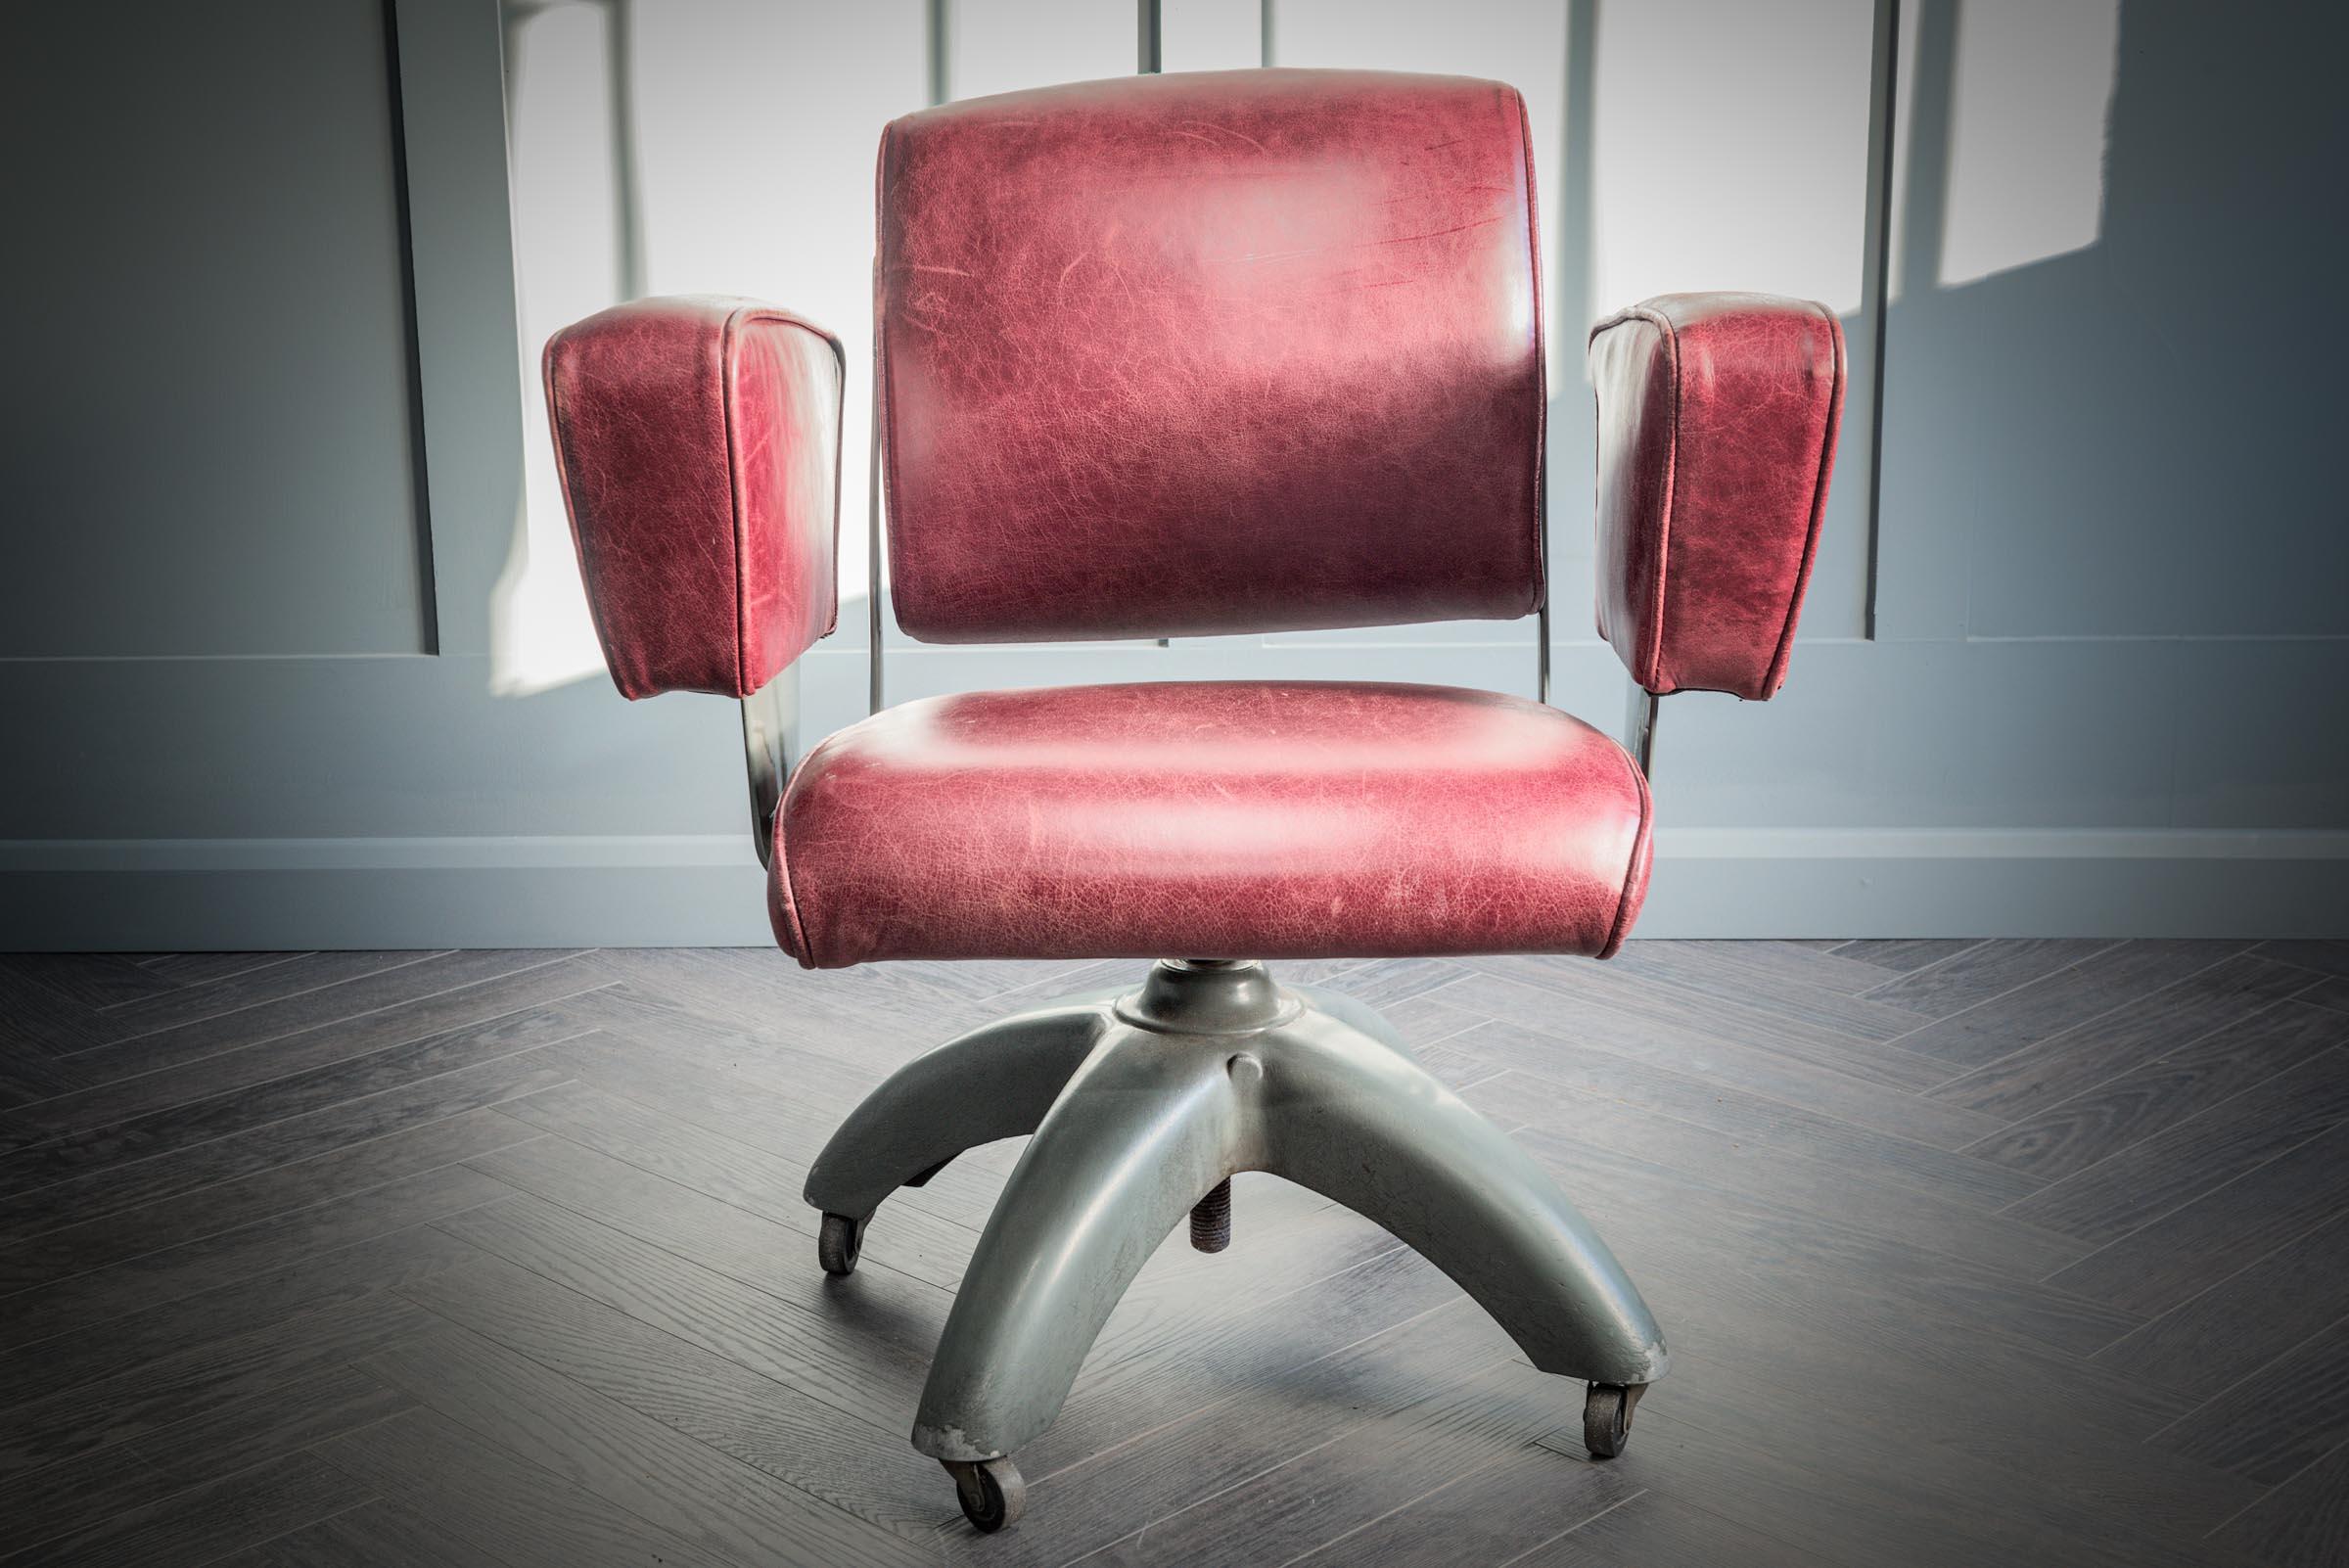 A beautiful desk chair by Tansad. This model is the De Luxe V.26 swivel office chair with chrome and red leather upholstery. Extremely comfortable and stylish. With powder coated aluminium frame and removable arms. Height adjustable. In very good